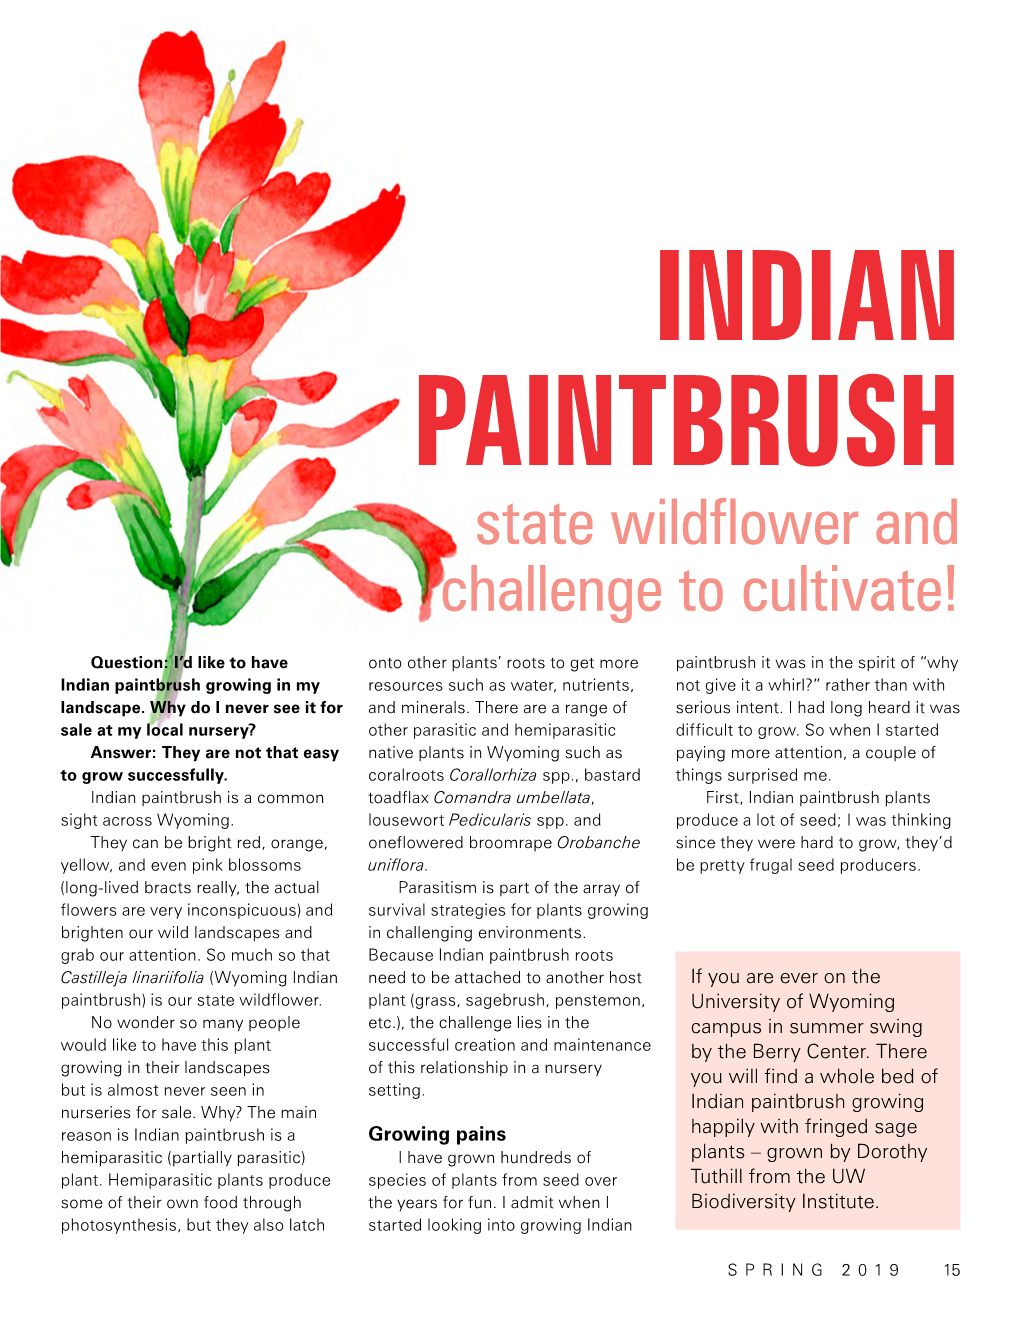 INDIAN PAINTBRUSH State Wildflower and Challenge to Cultivate!